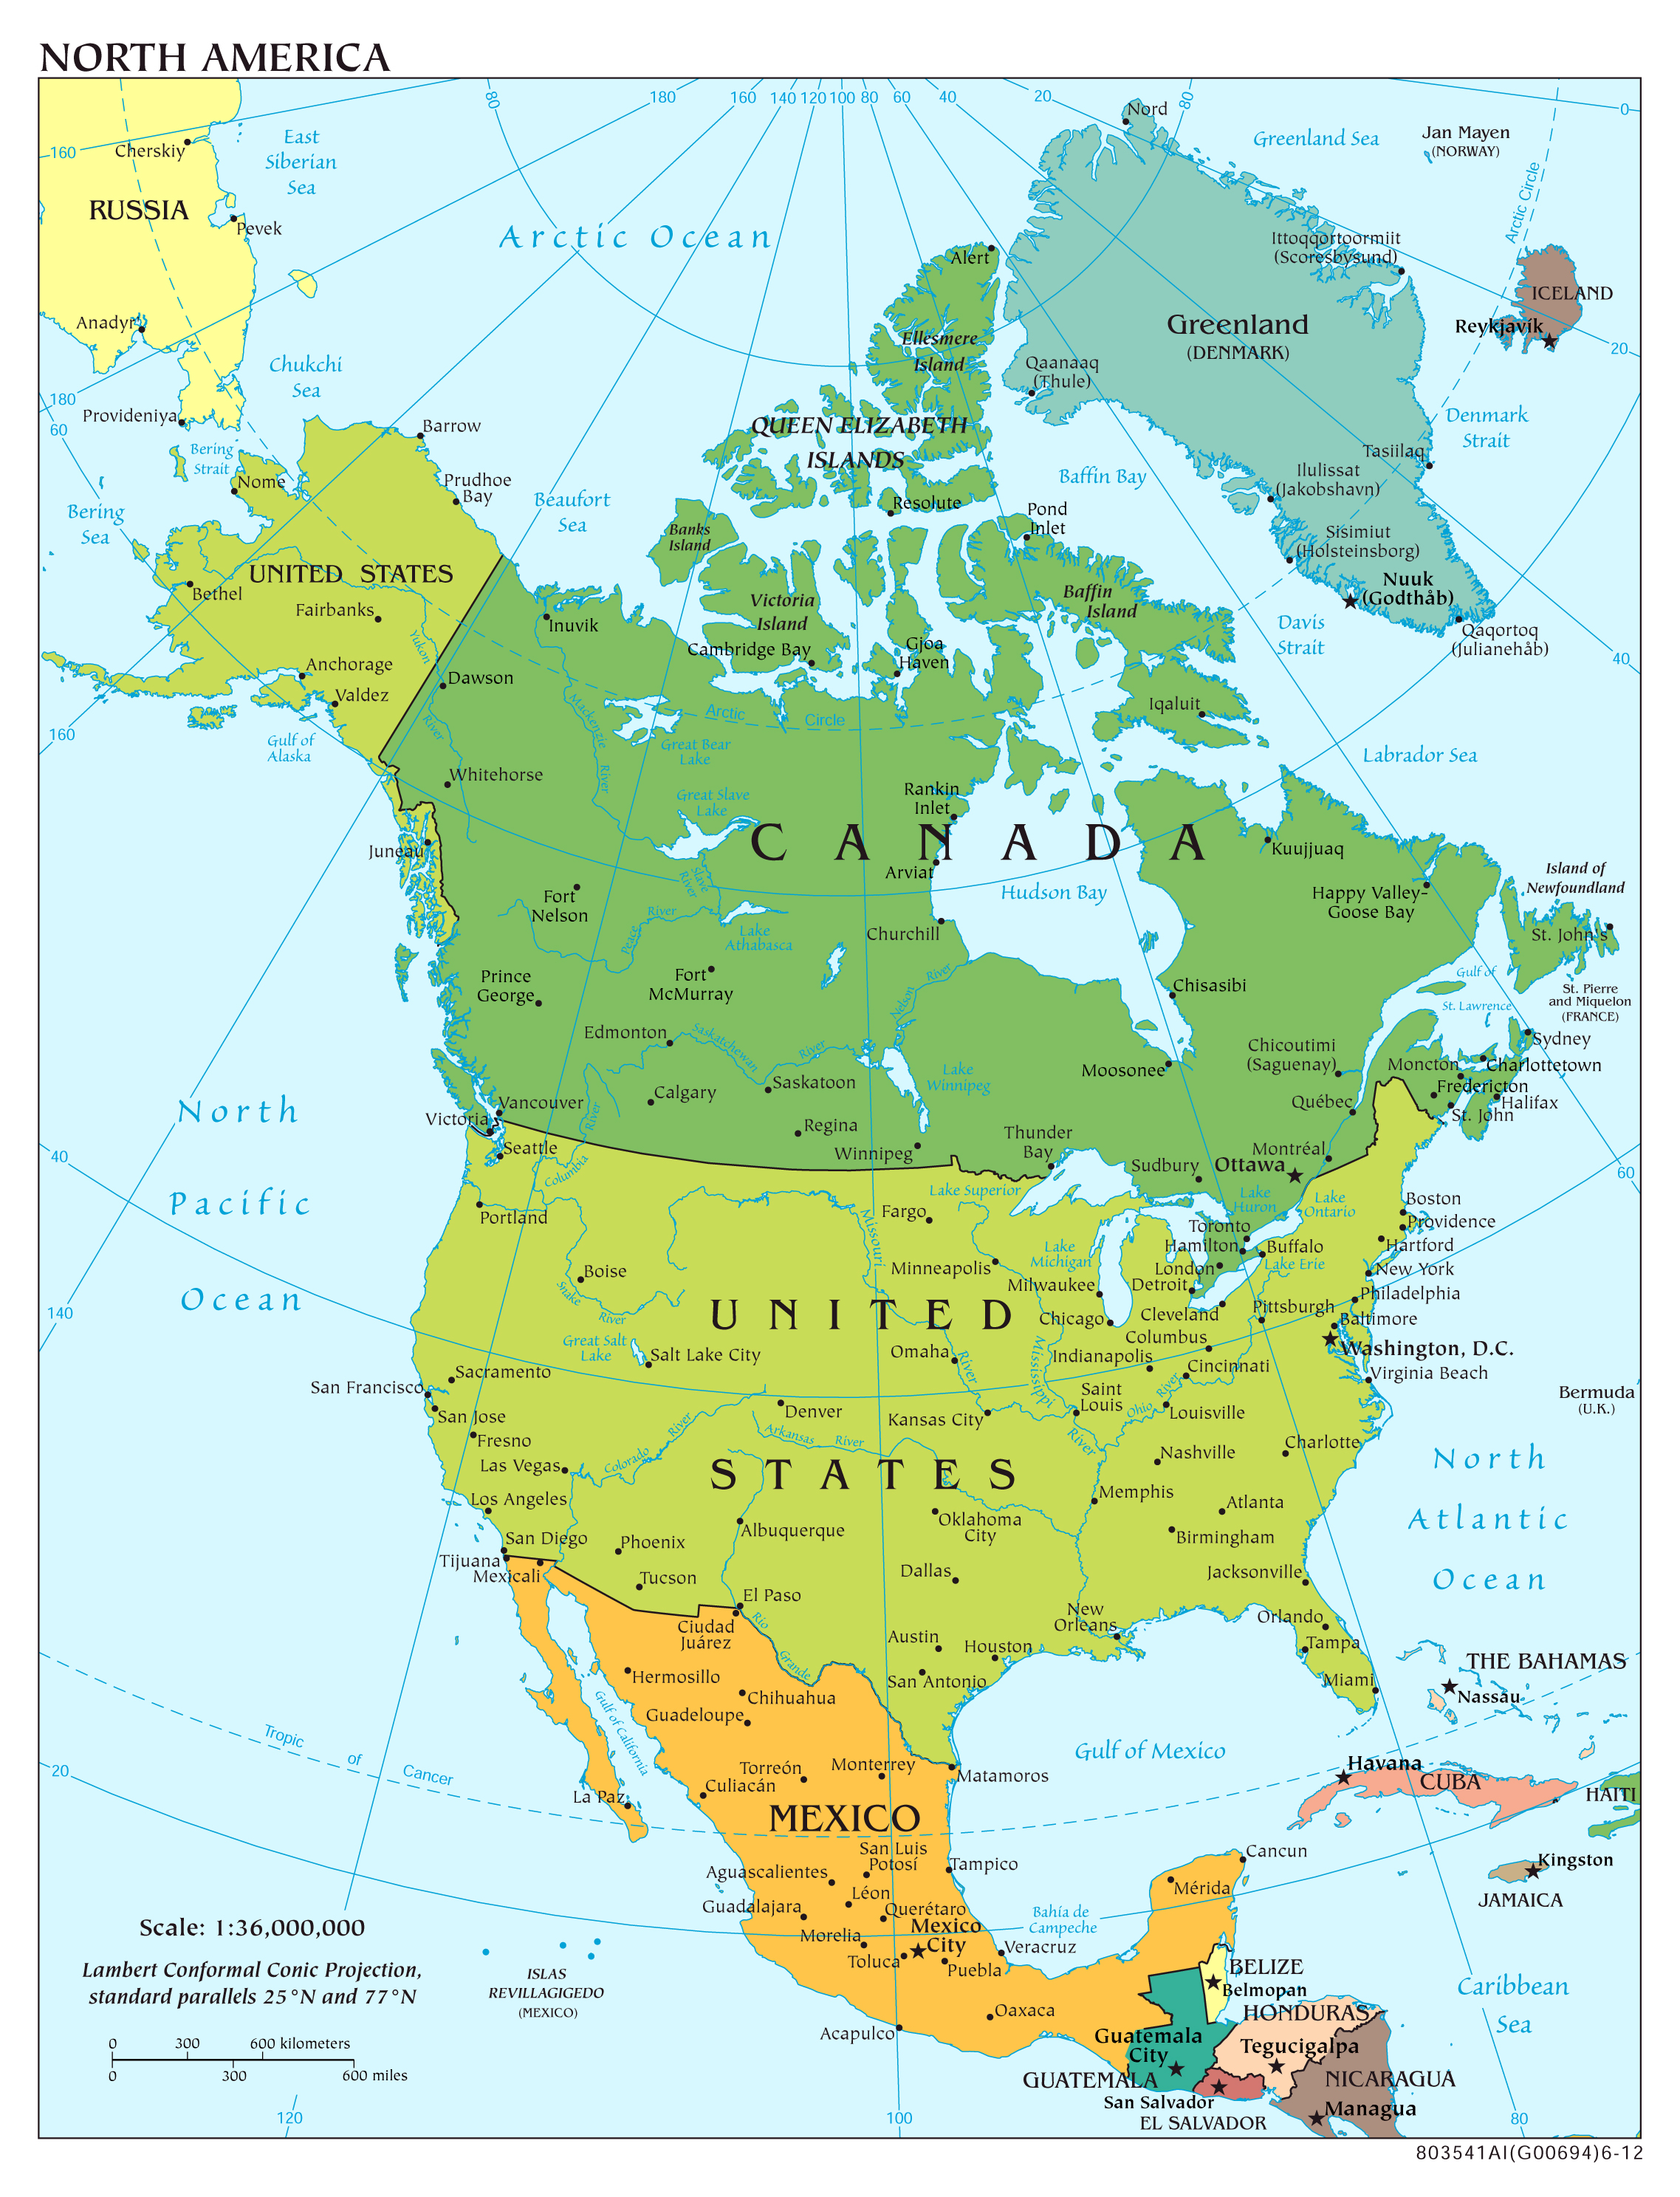 large-scale-political-map-of-north-america-with-major-cities-and